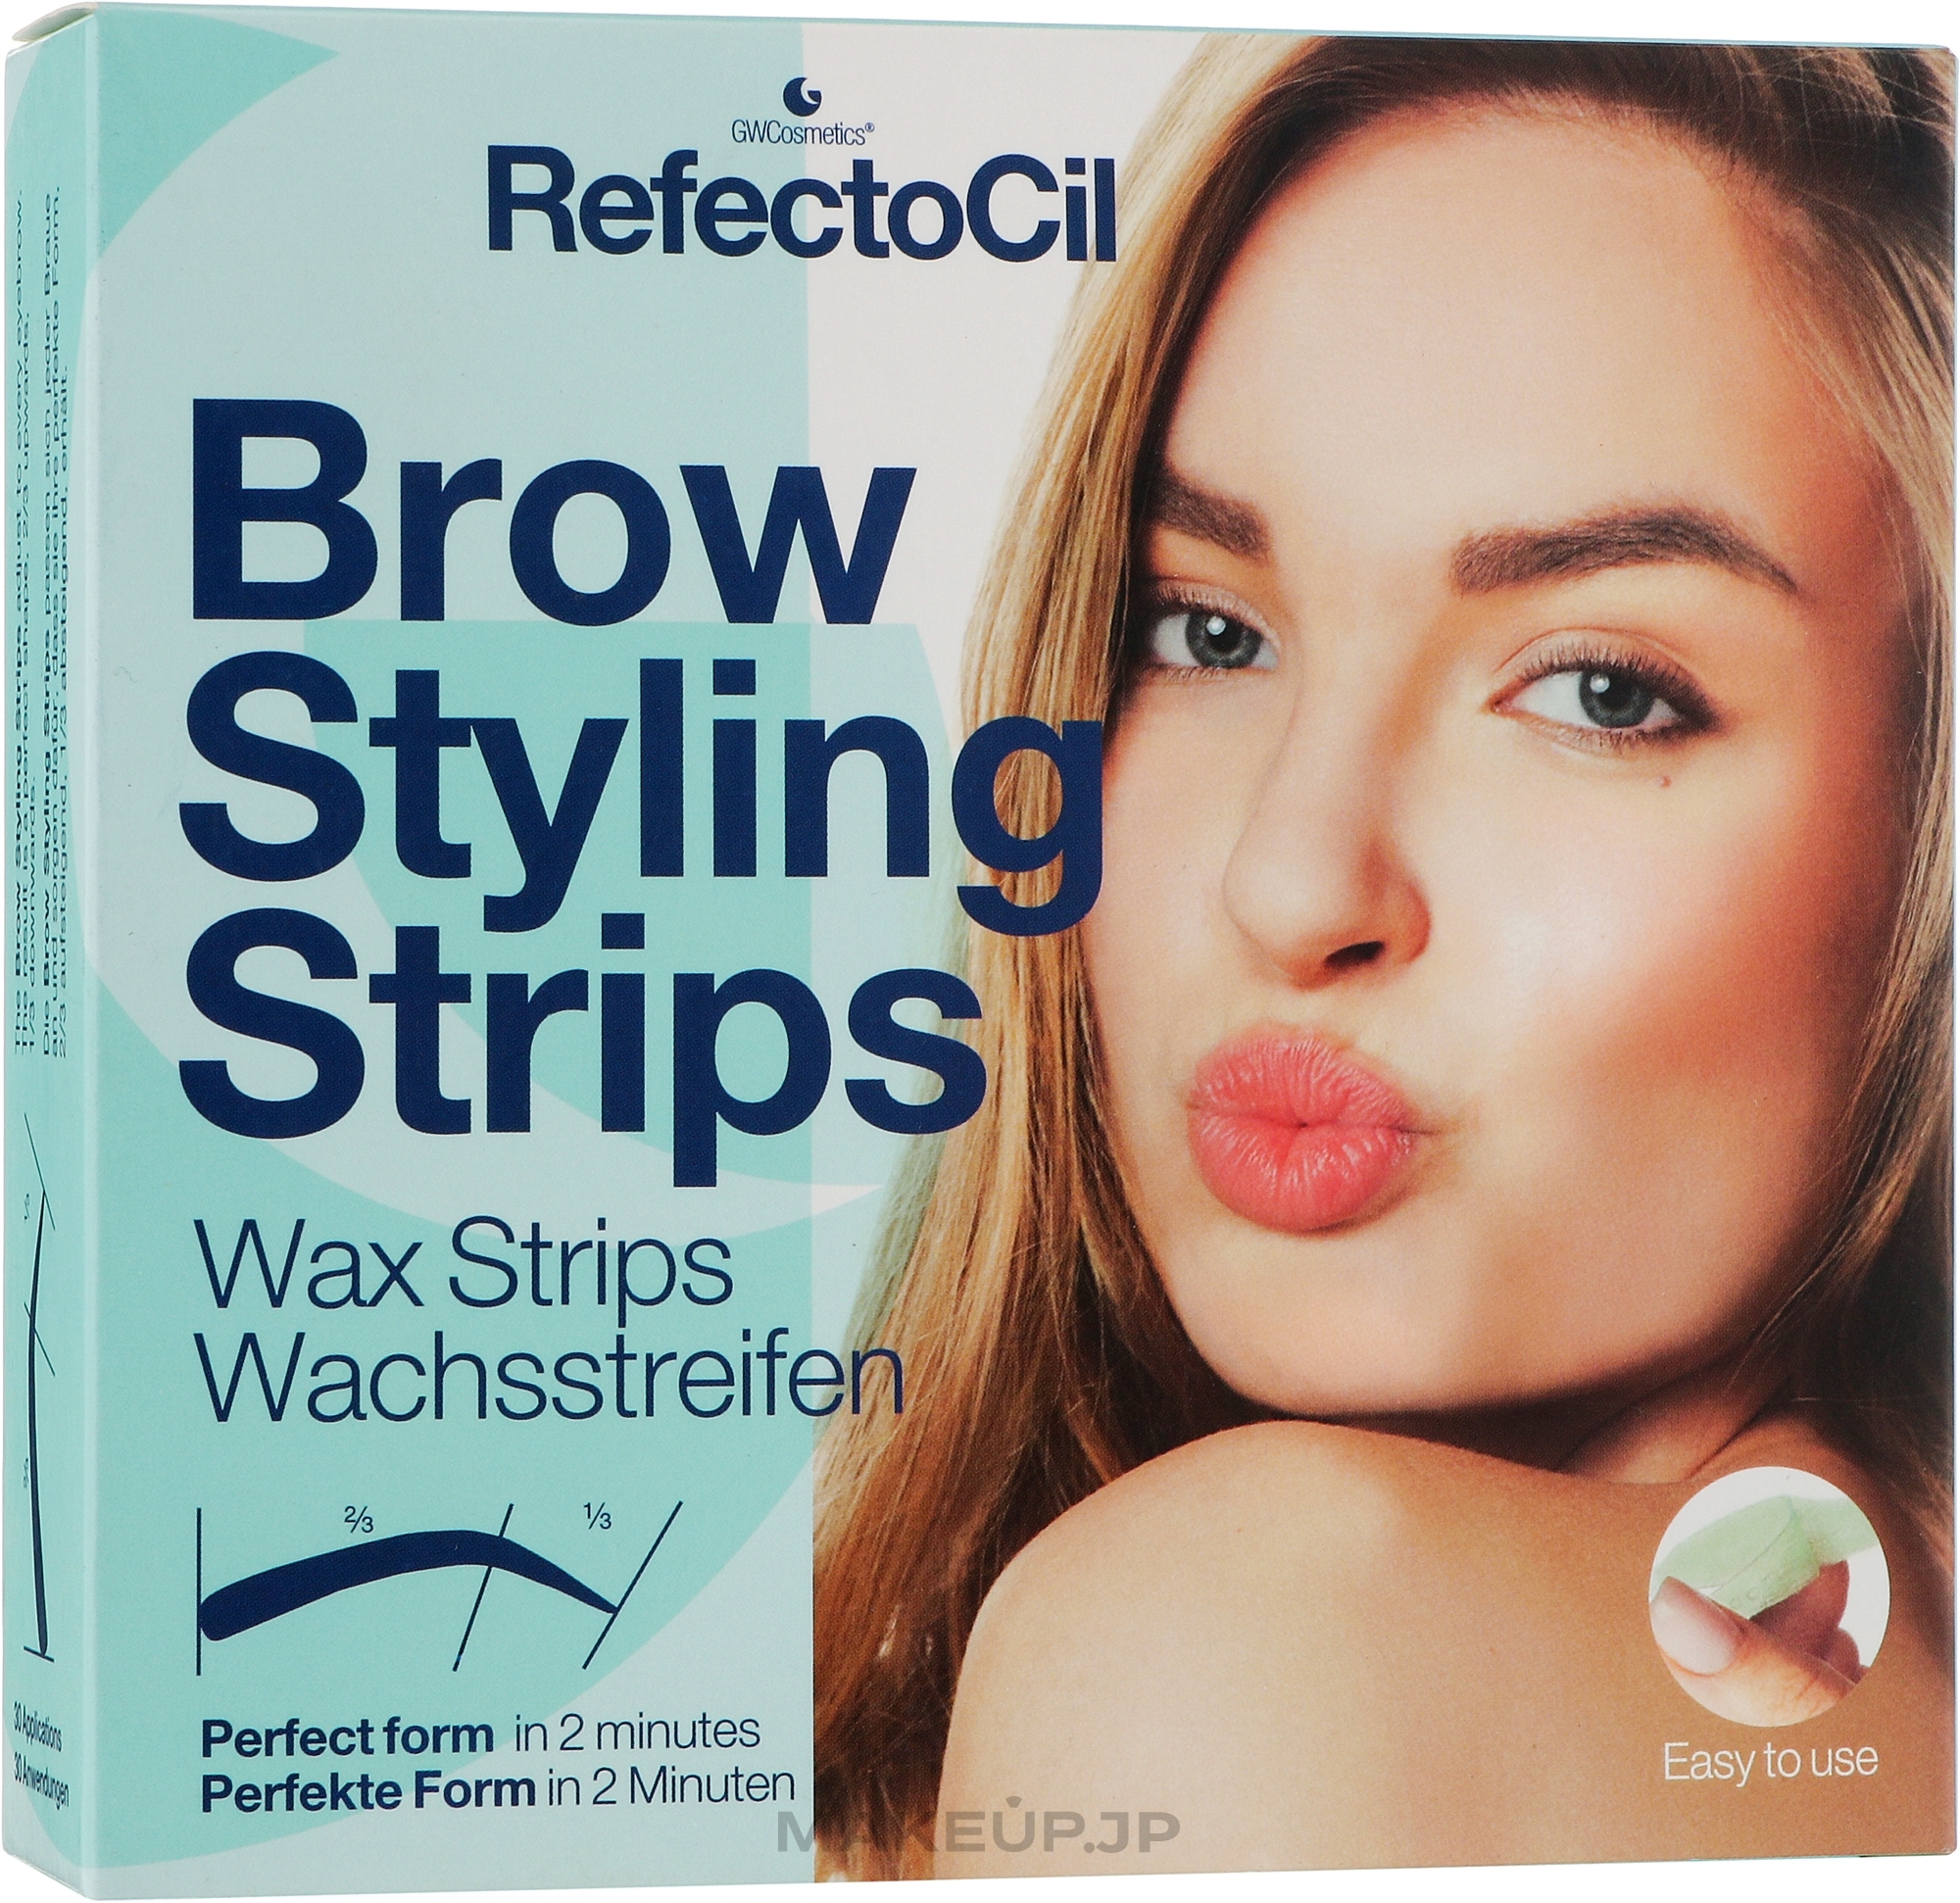 Wax Strips for Eyebrows - RefectoCil Brow Styling Wax Strips — photo 30 szt.